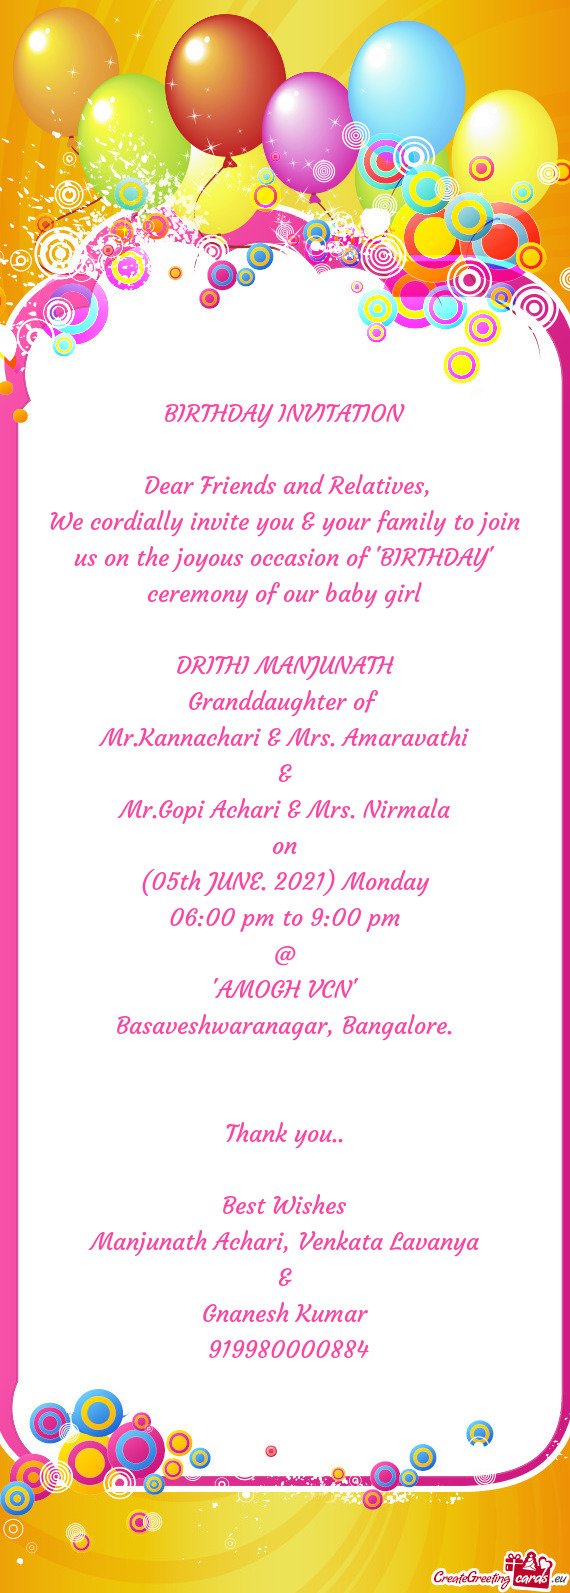 We cordially invite you & your family to join us on the joyous occasion of "BIRTHDAY" ceremony of ou